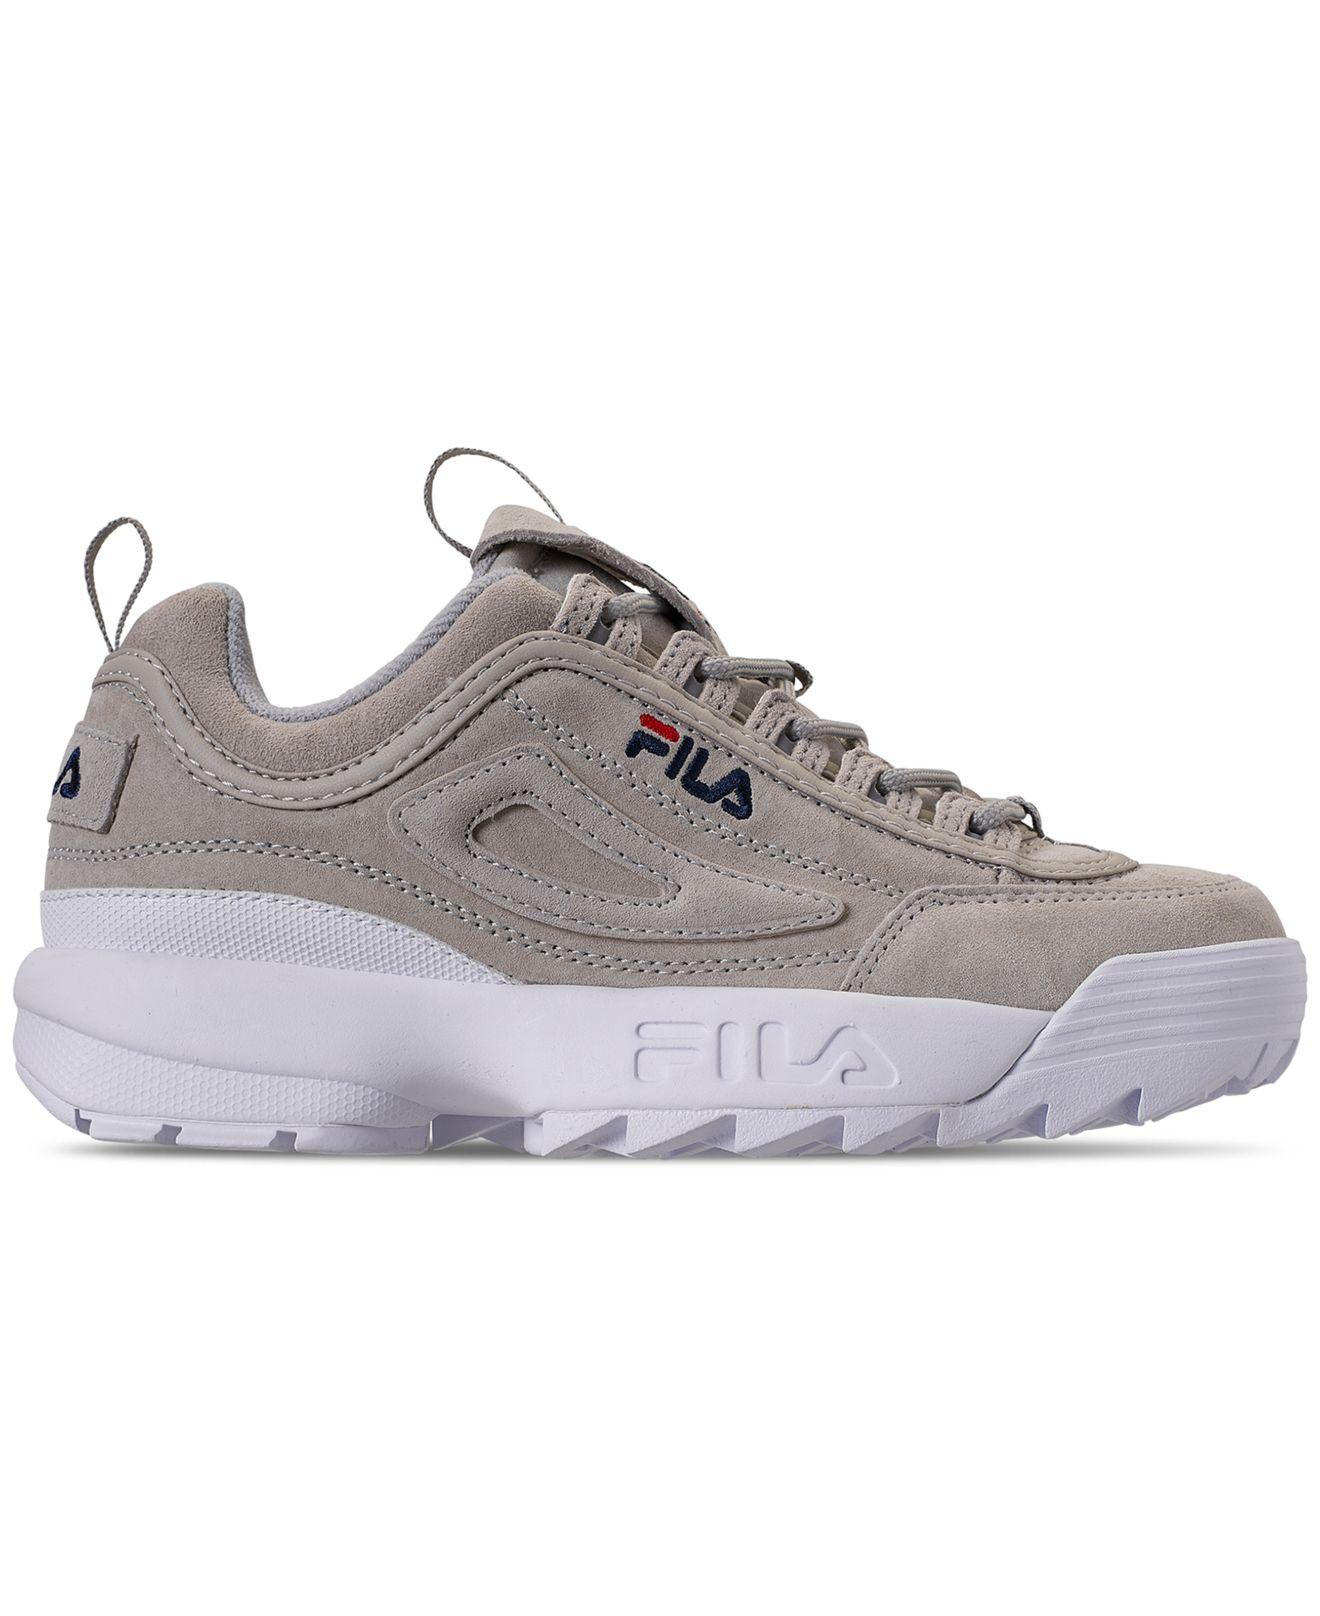 Lyst - Fila Disruptor Ii Premium Suede Casual Athletic Sneakers From ...